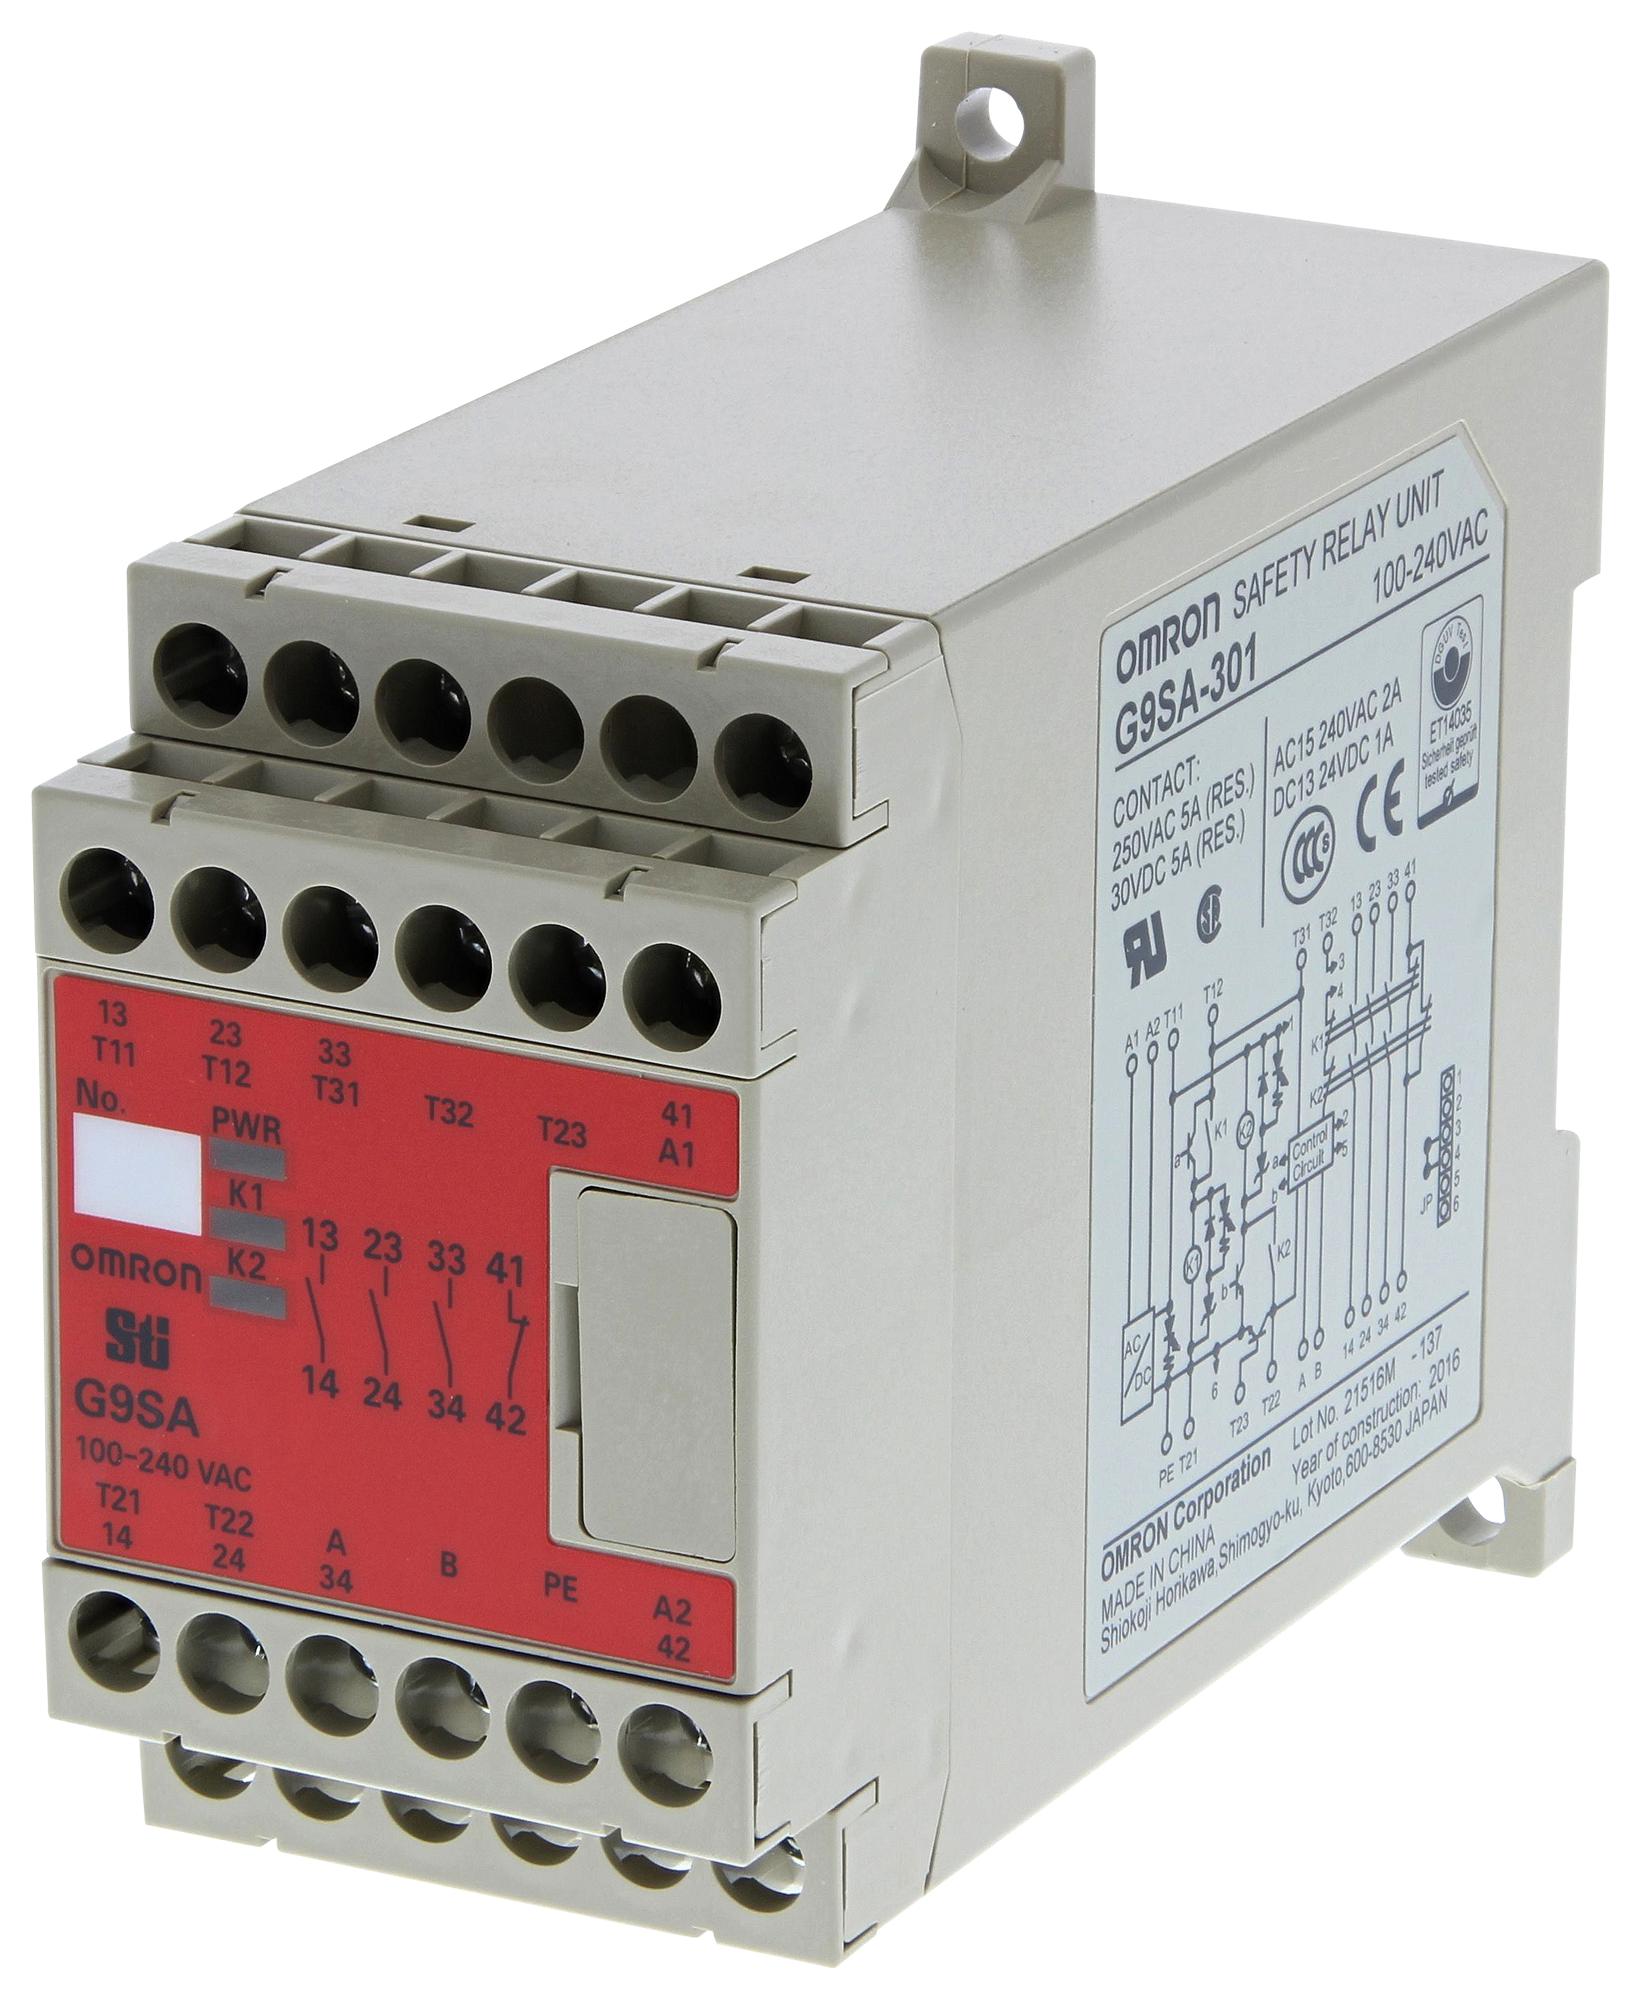 G9SA301AC DC24 SAFETY RELAY, 3PST, 24VAC/DC, 5A, SCREW OMRON